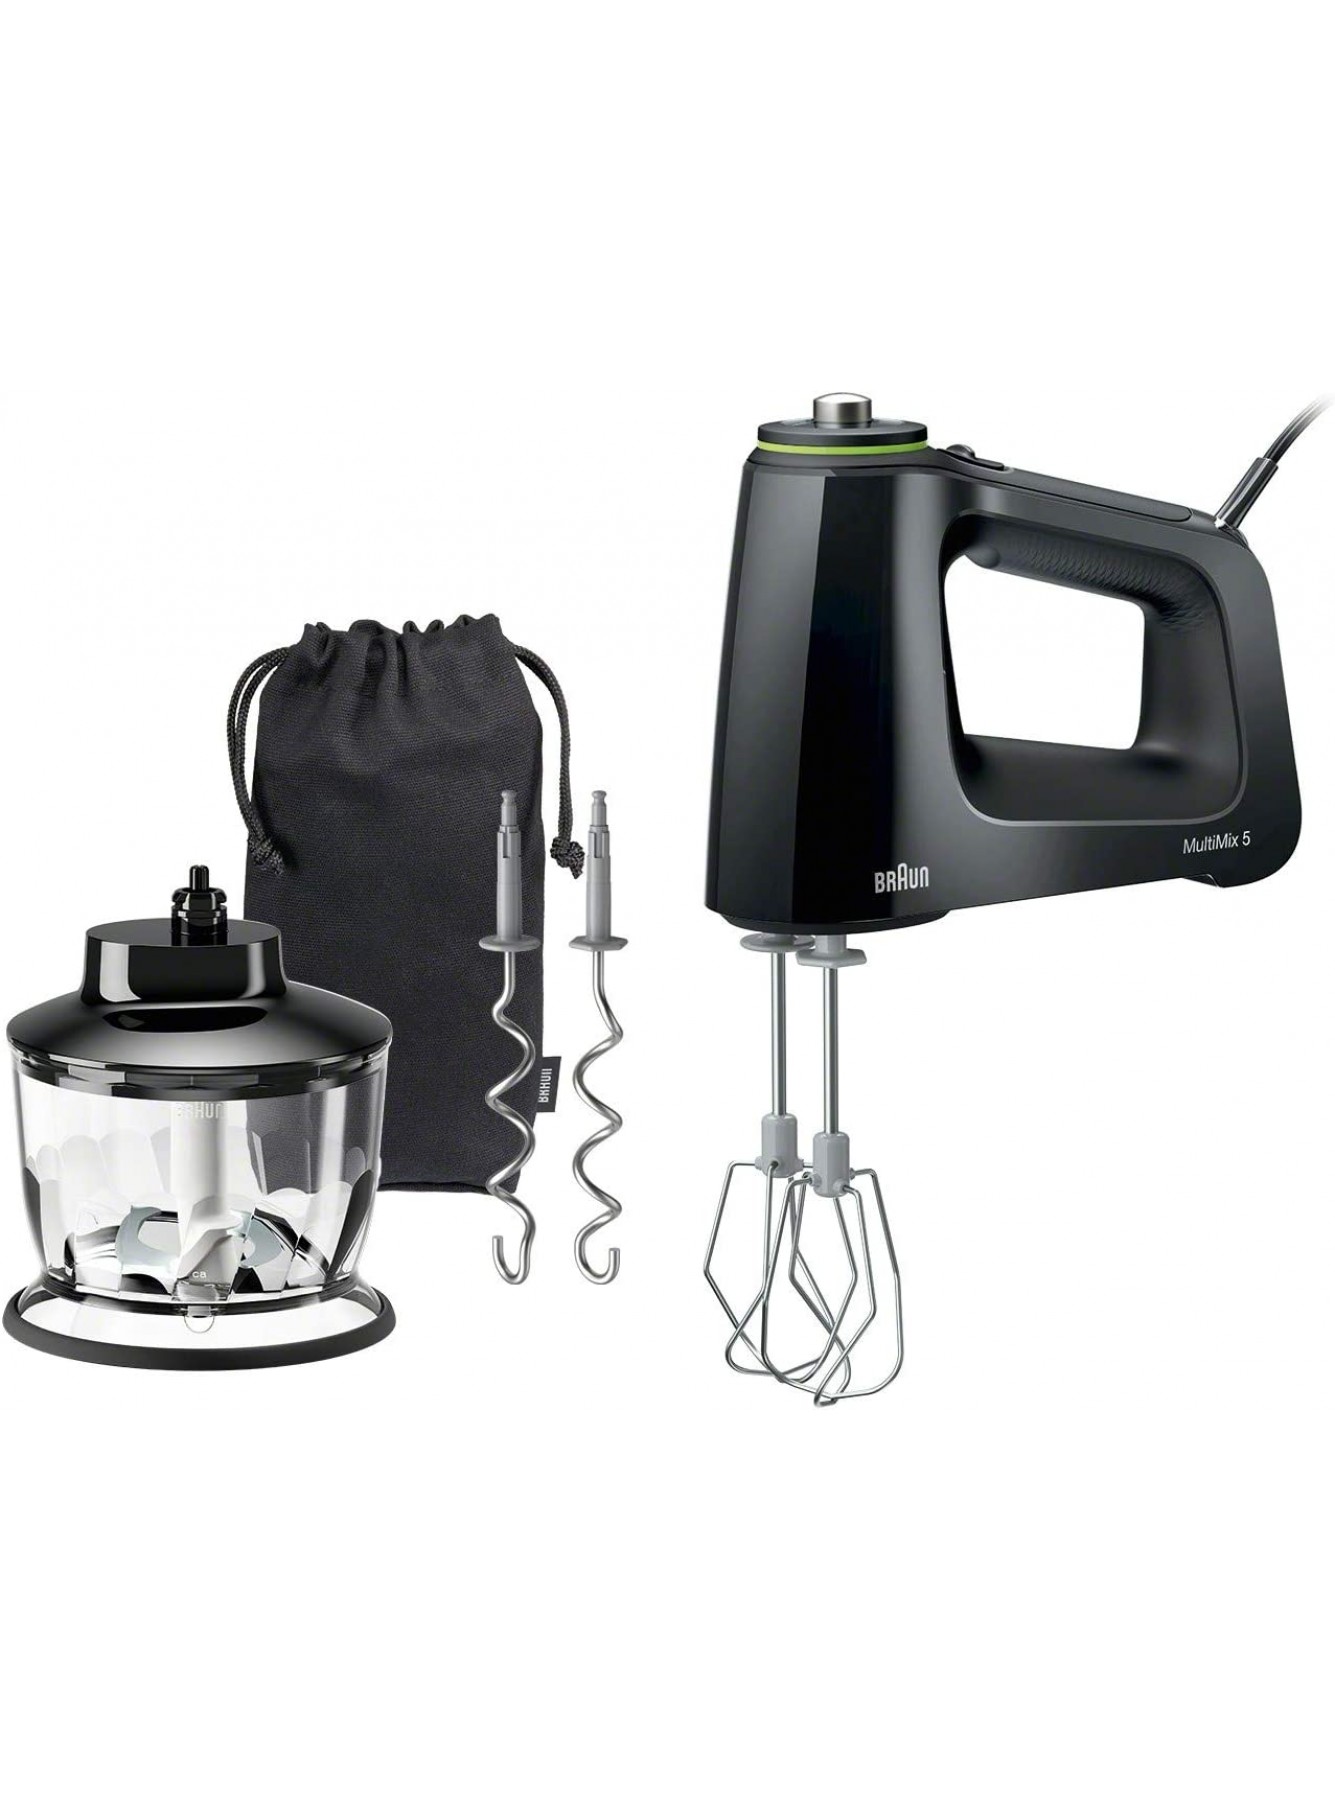 Braun Electric Hand Mixer 9-Speed 350W Lightweight with Soft Anti-Slip Handle Accessories to Beat & Whisk Multi-Whisk Dough Hooks to Knead & 2-Cup Chopper + Storage Bag MultiMix 5 HM5130 B07FRKGLFG